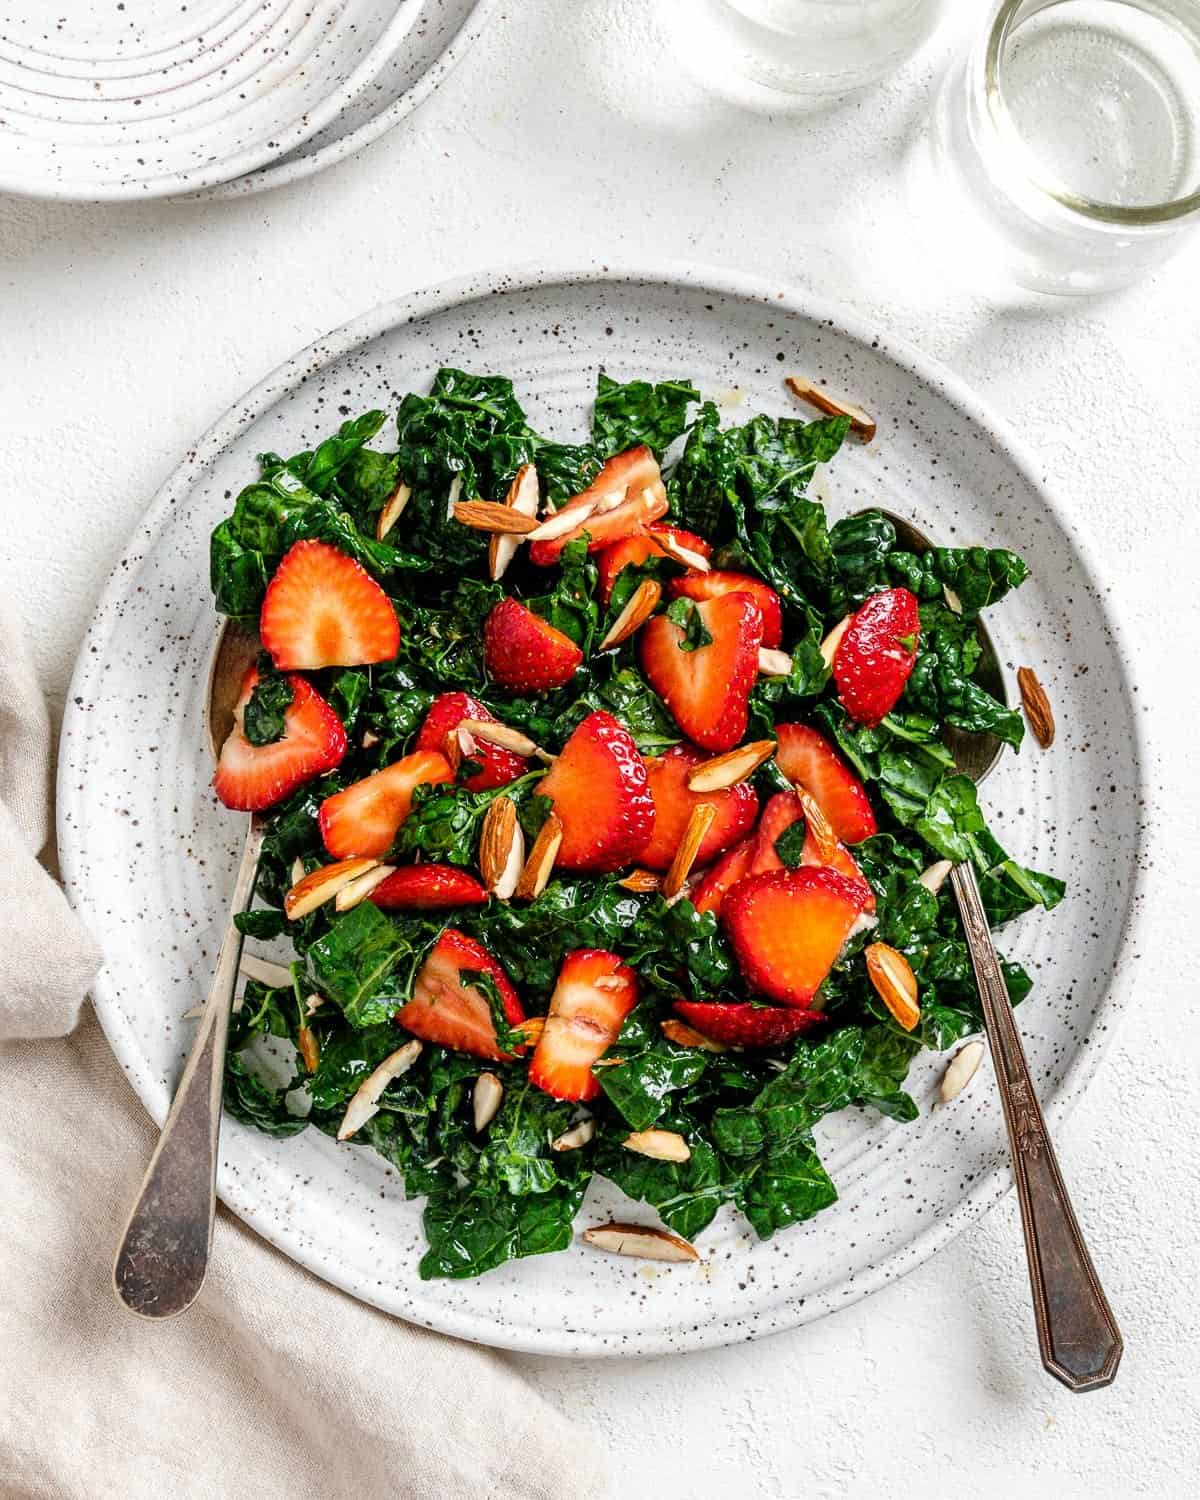 completed Strawberry Kale Salad on a white plate against a white surface